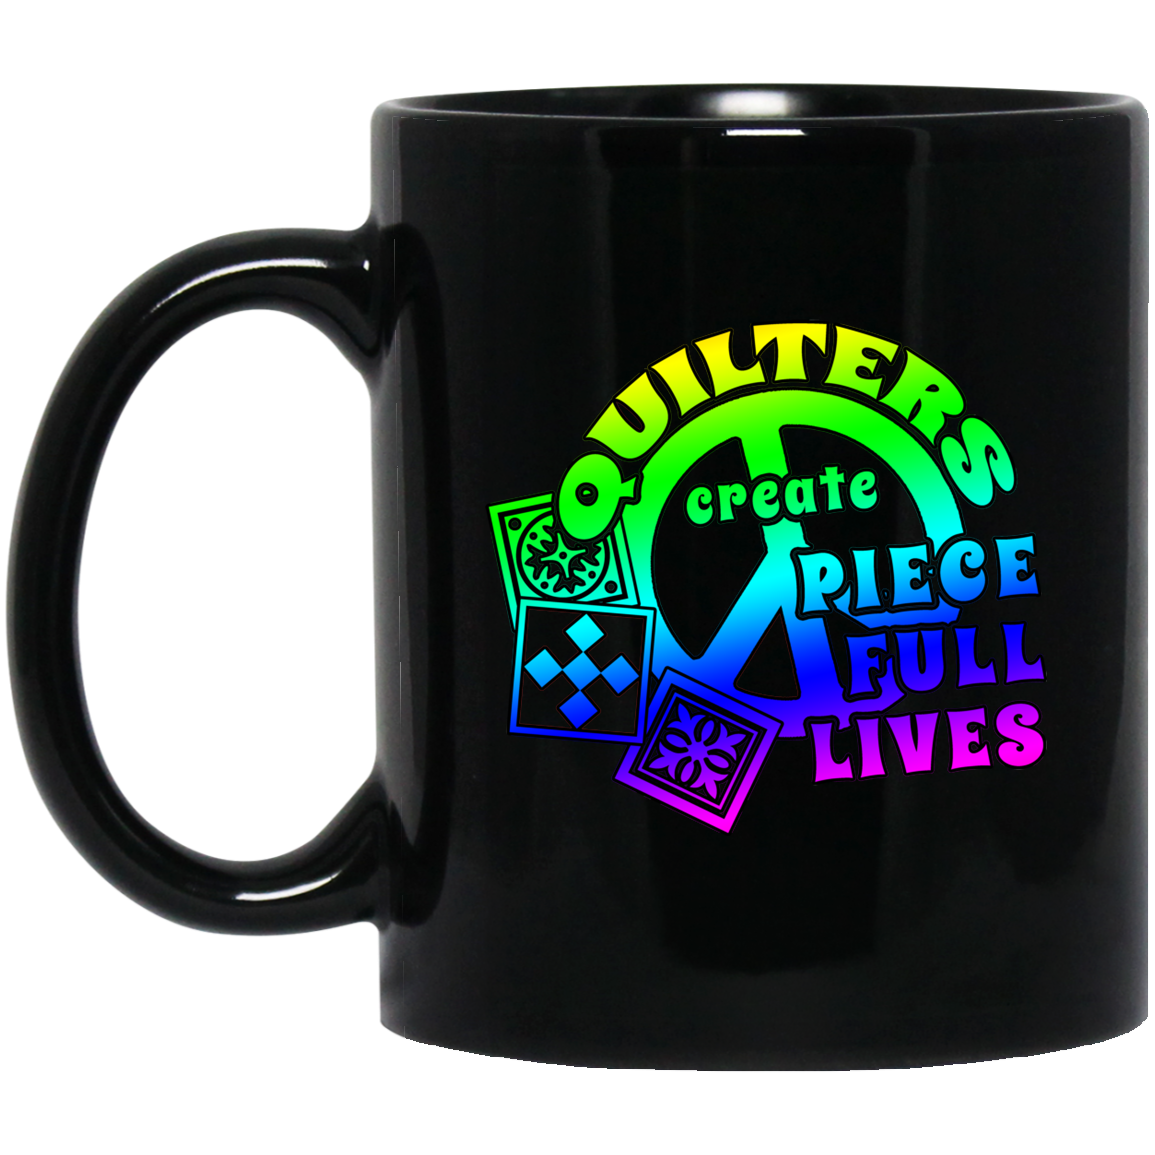 Quilters Create Pieceful Lives Black Mugs